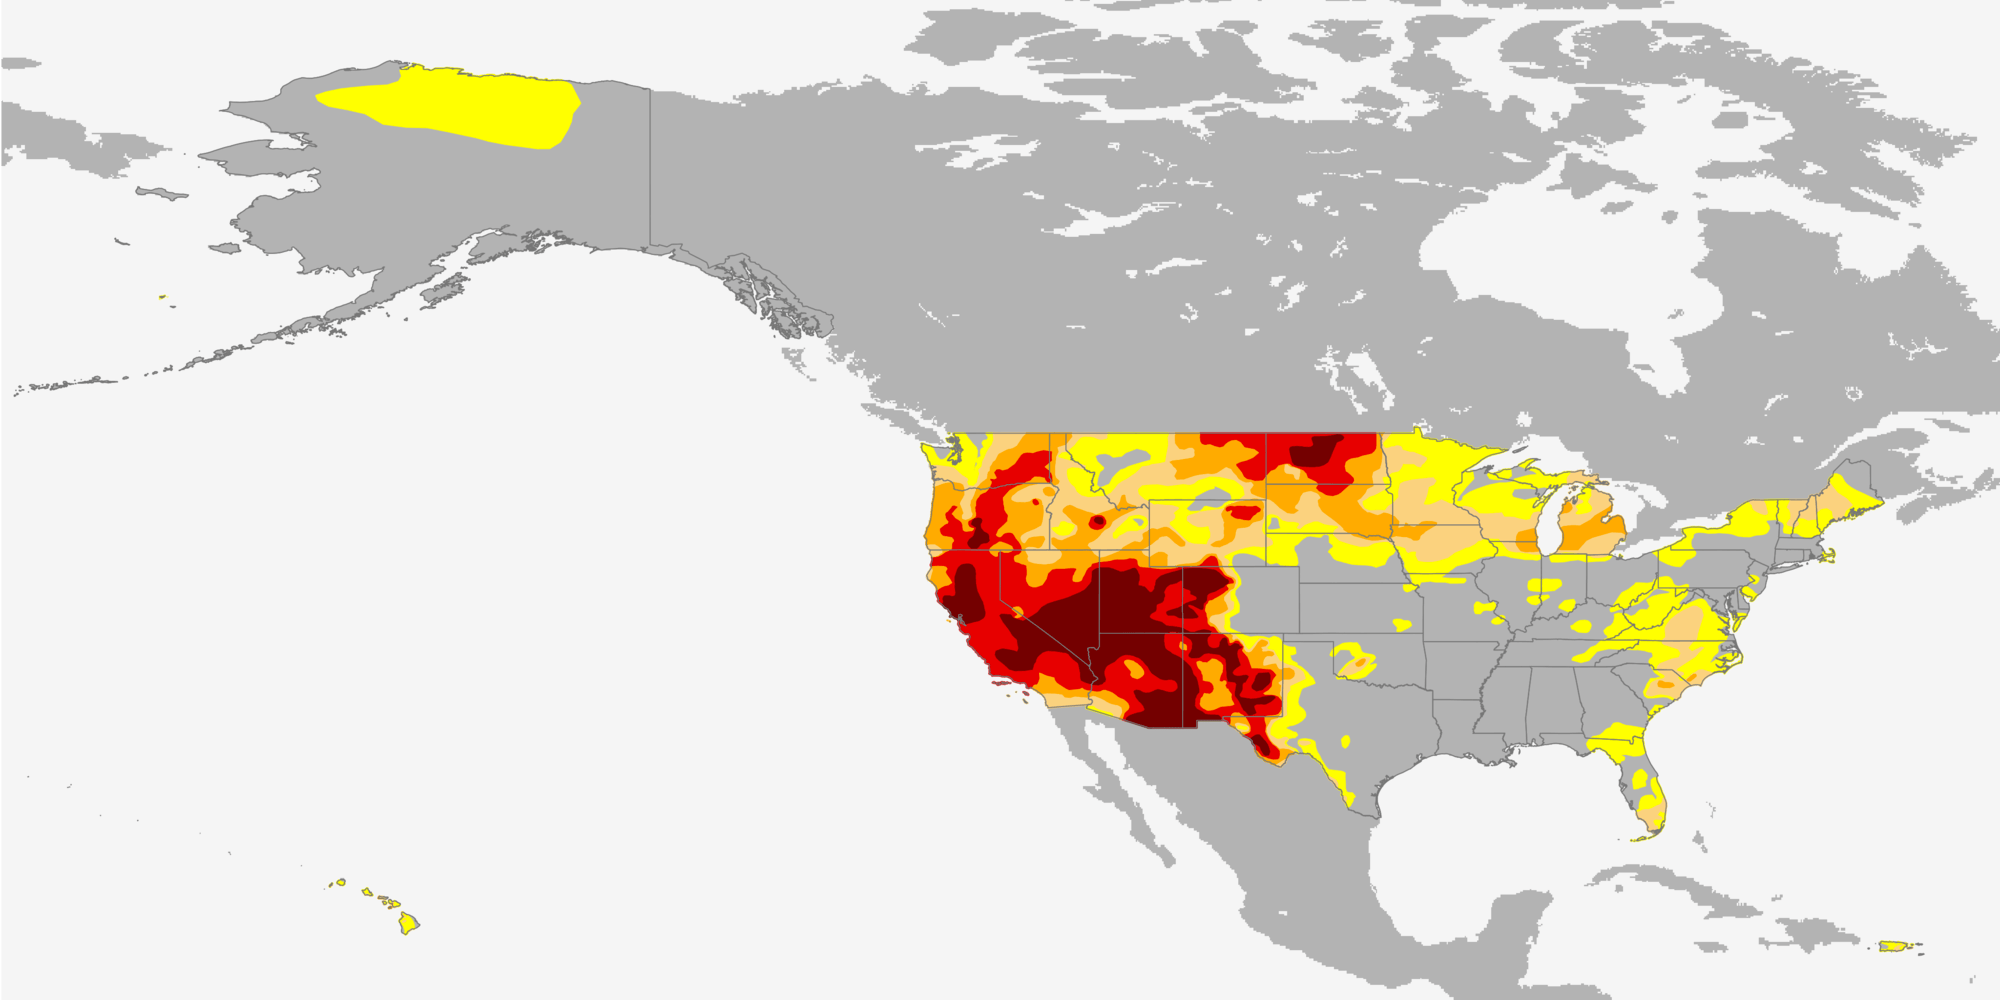 Much of the West and Southwest and portions of the Northern Plains are under extreme “megadrought” conditions. July 2021